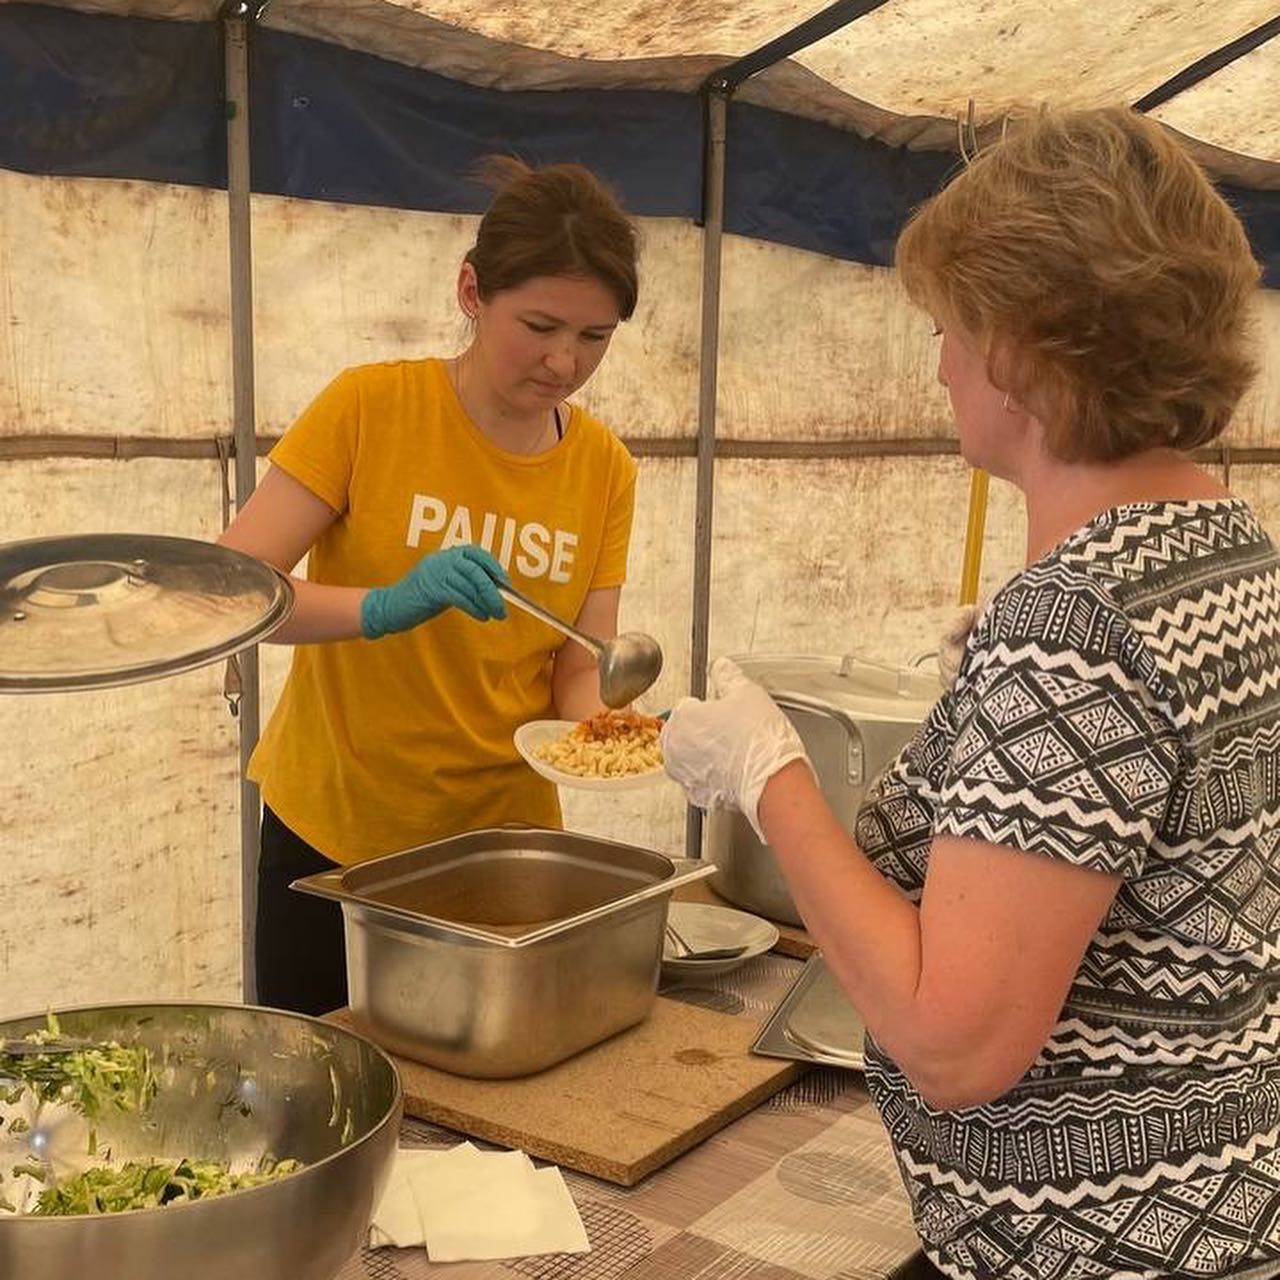 a woman in a yellow shirt is serving food to another woman.